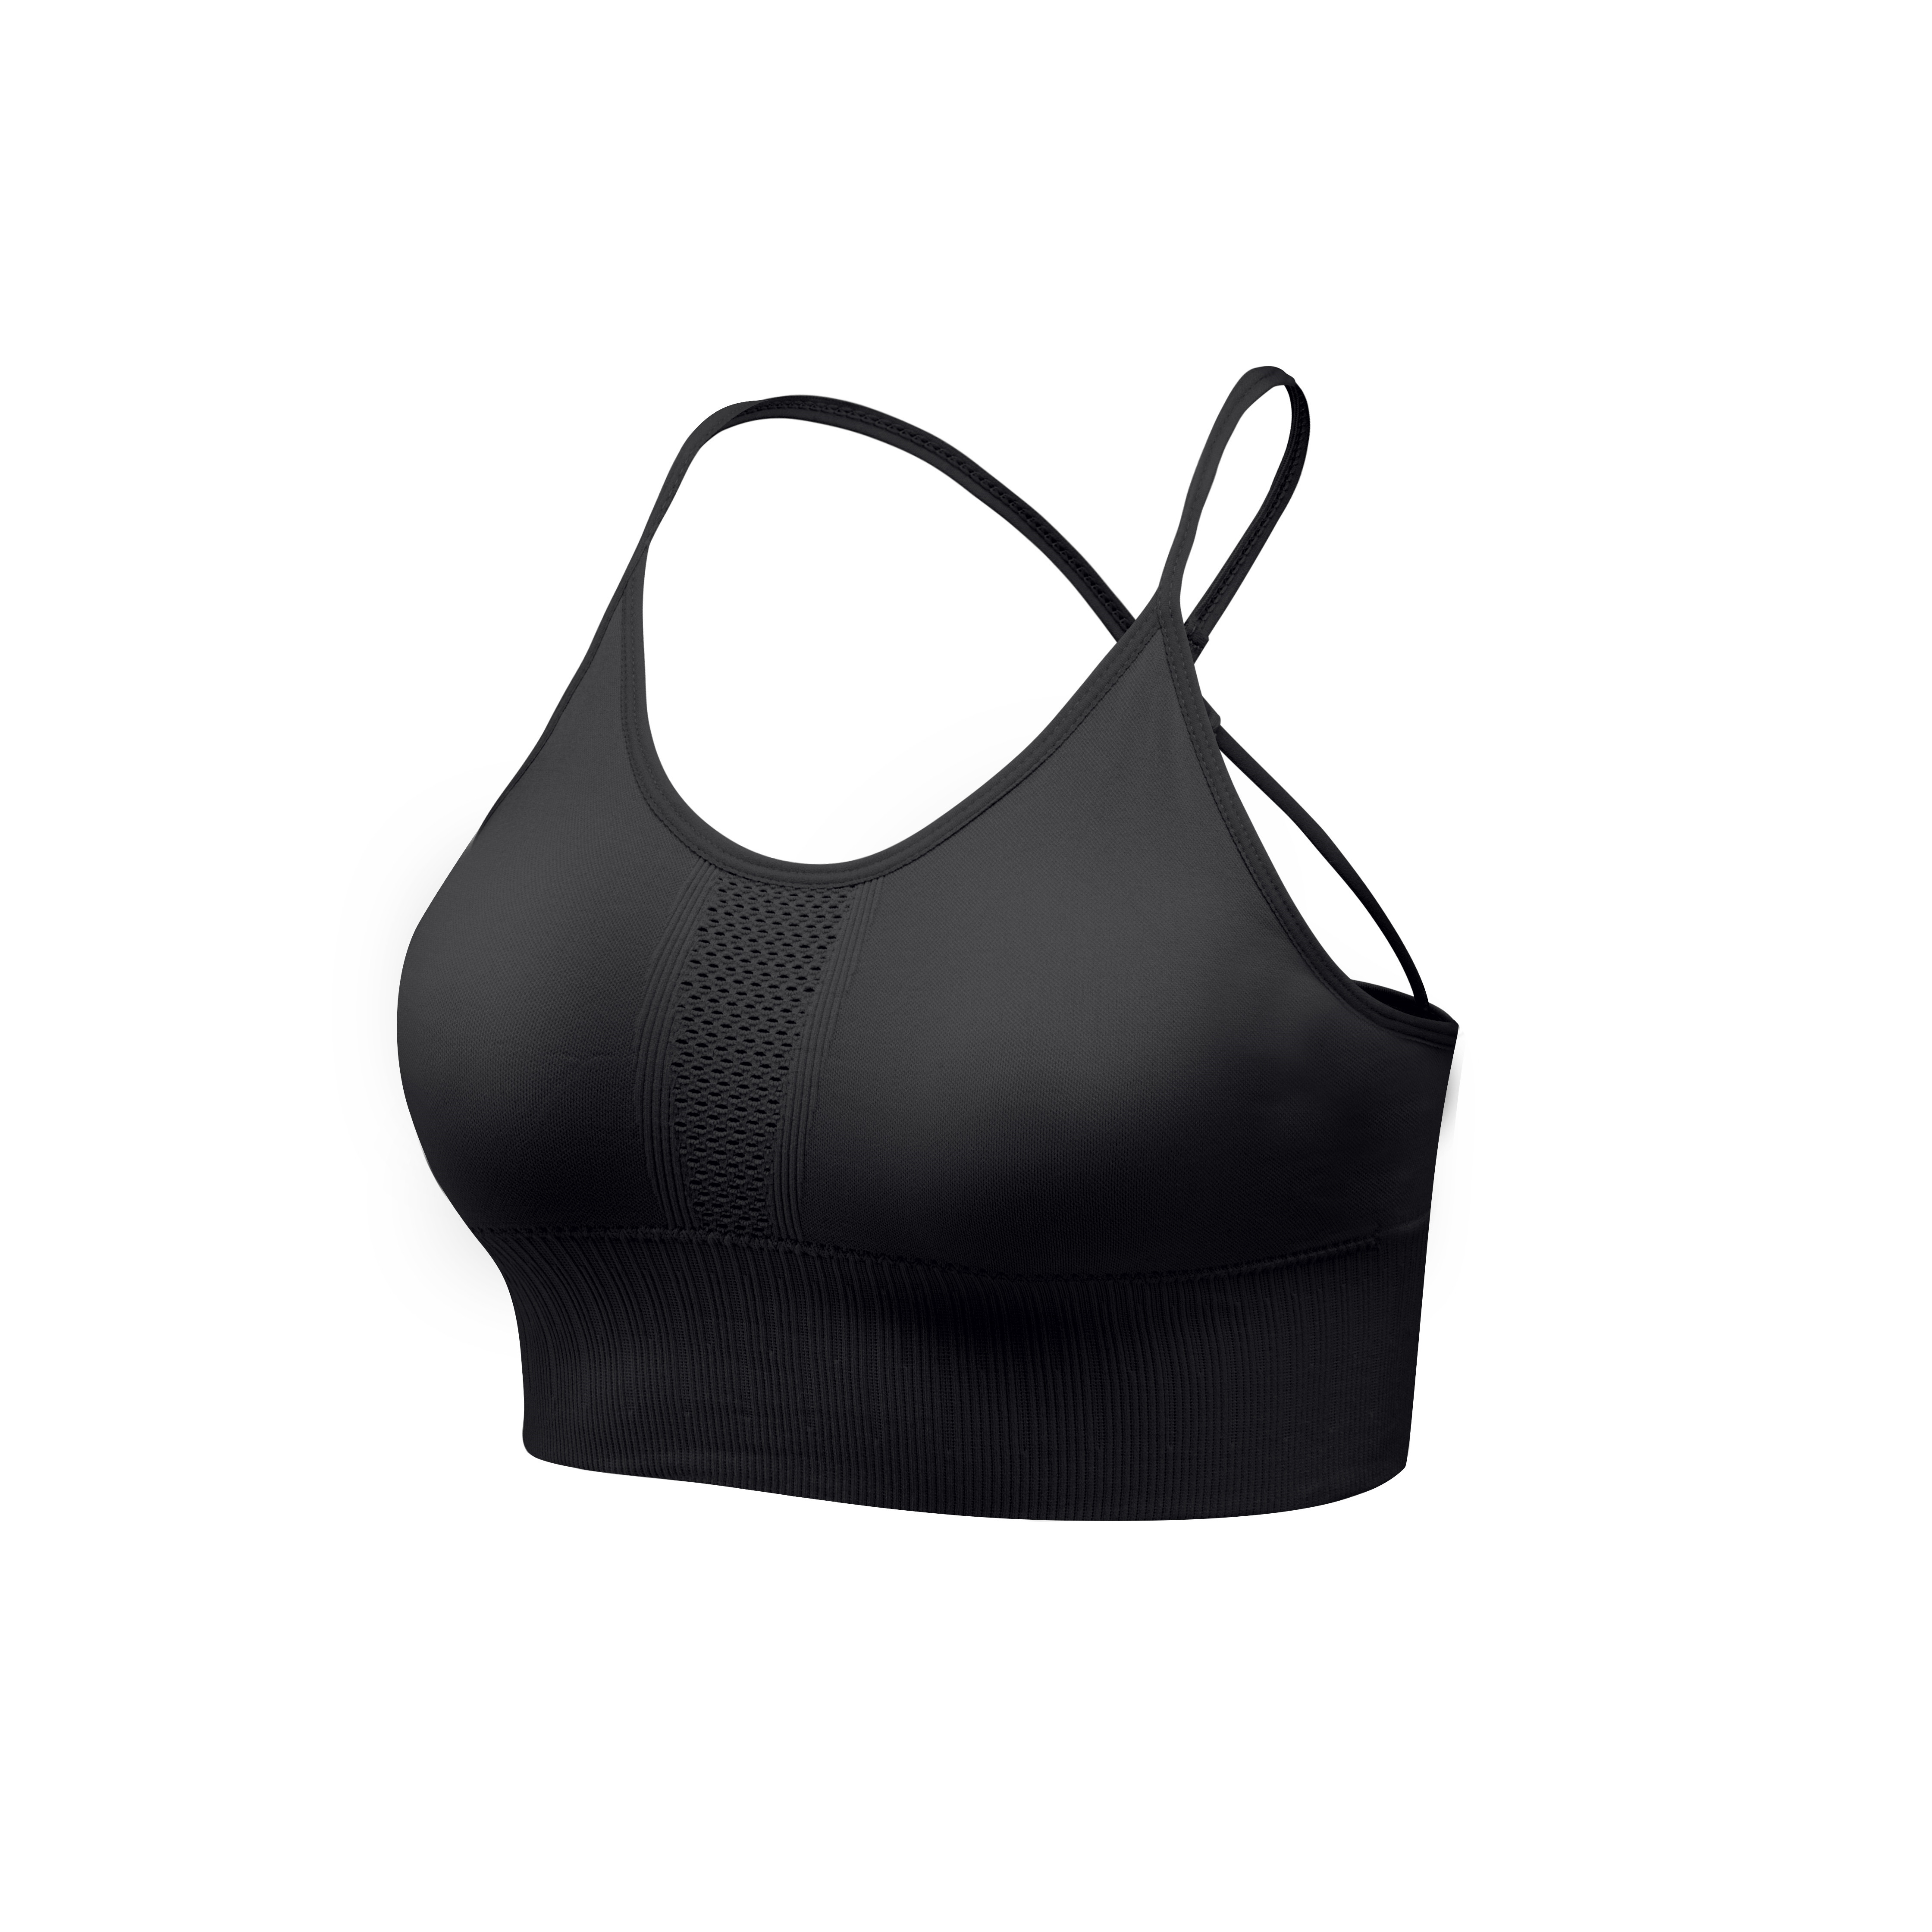 Dmwhsy Sports Bras for Women,Sexy Criss Cross Back Padded Strappy